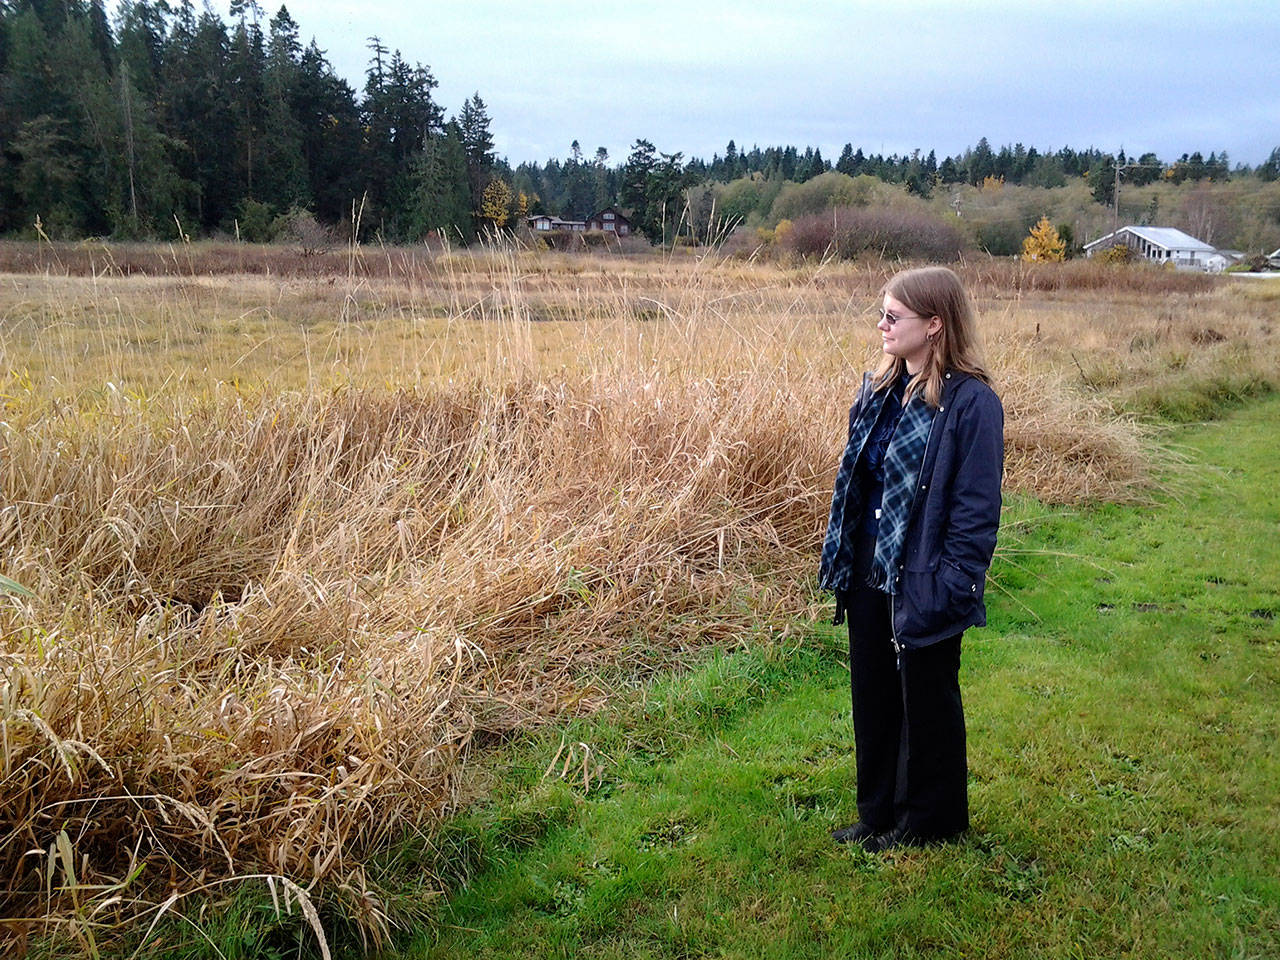 Maggs House manager Cassandra Rowland takes in the view of the wetland behind the Maggs House. “I love the view. It’s a gorgeous view and you can see all the life that comes out here,” Rowland said. (Richard Walker/Kitsap News Group)                                 Maggs House manager Cassandra Rowland takes in the view of the wetland behind the Maggs House. “I love the view. It’s a gorgeous view and you can see all the life that comes out here,” Rowland said. (Richard Walker/Kitsap News Group)